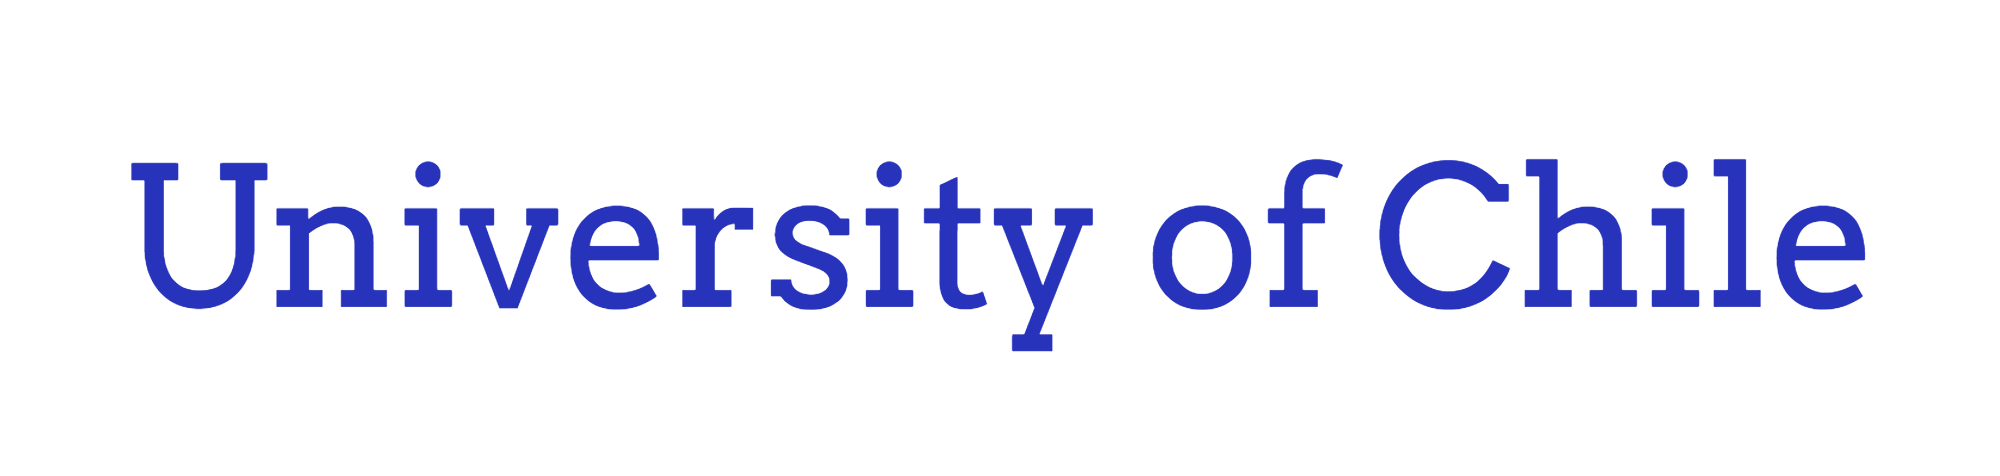 University of Chile-logo.png